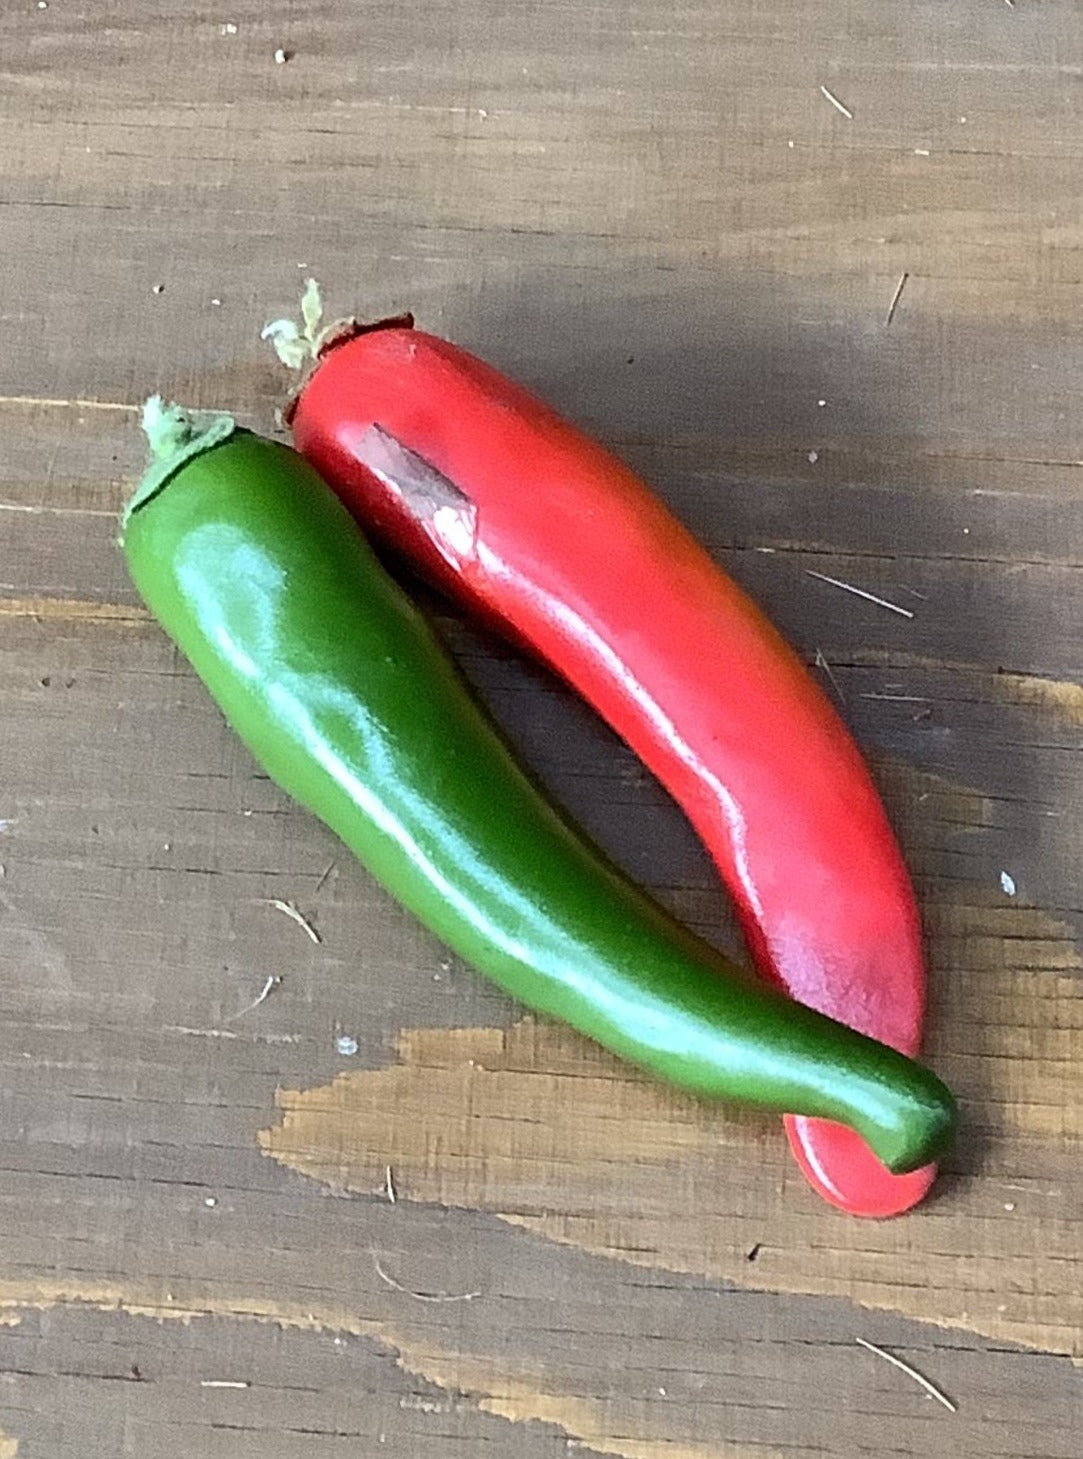 Faux Chili Peppers